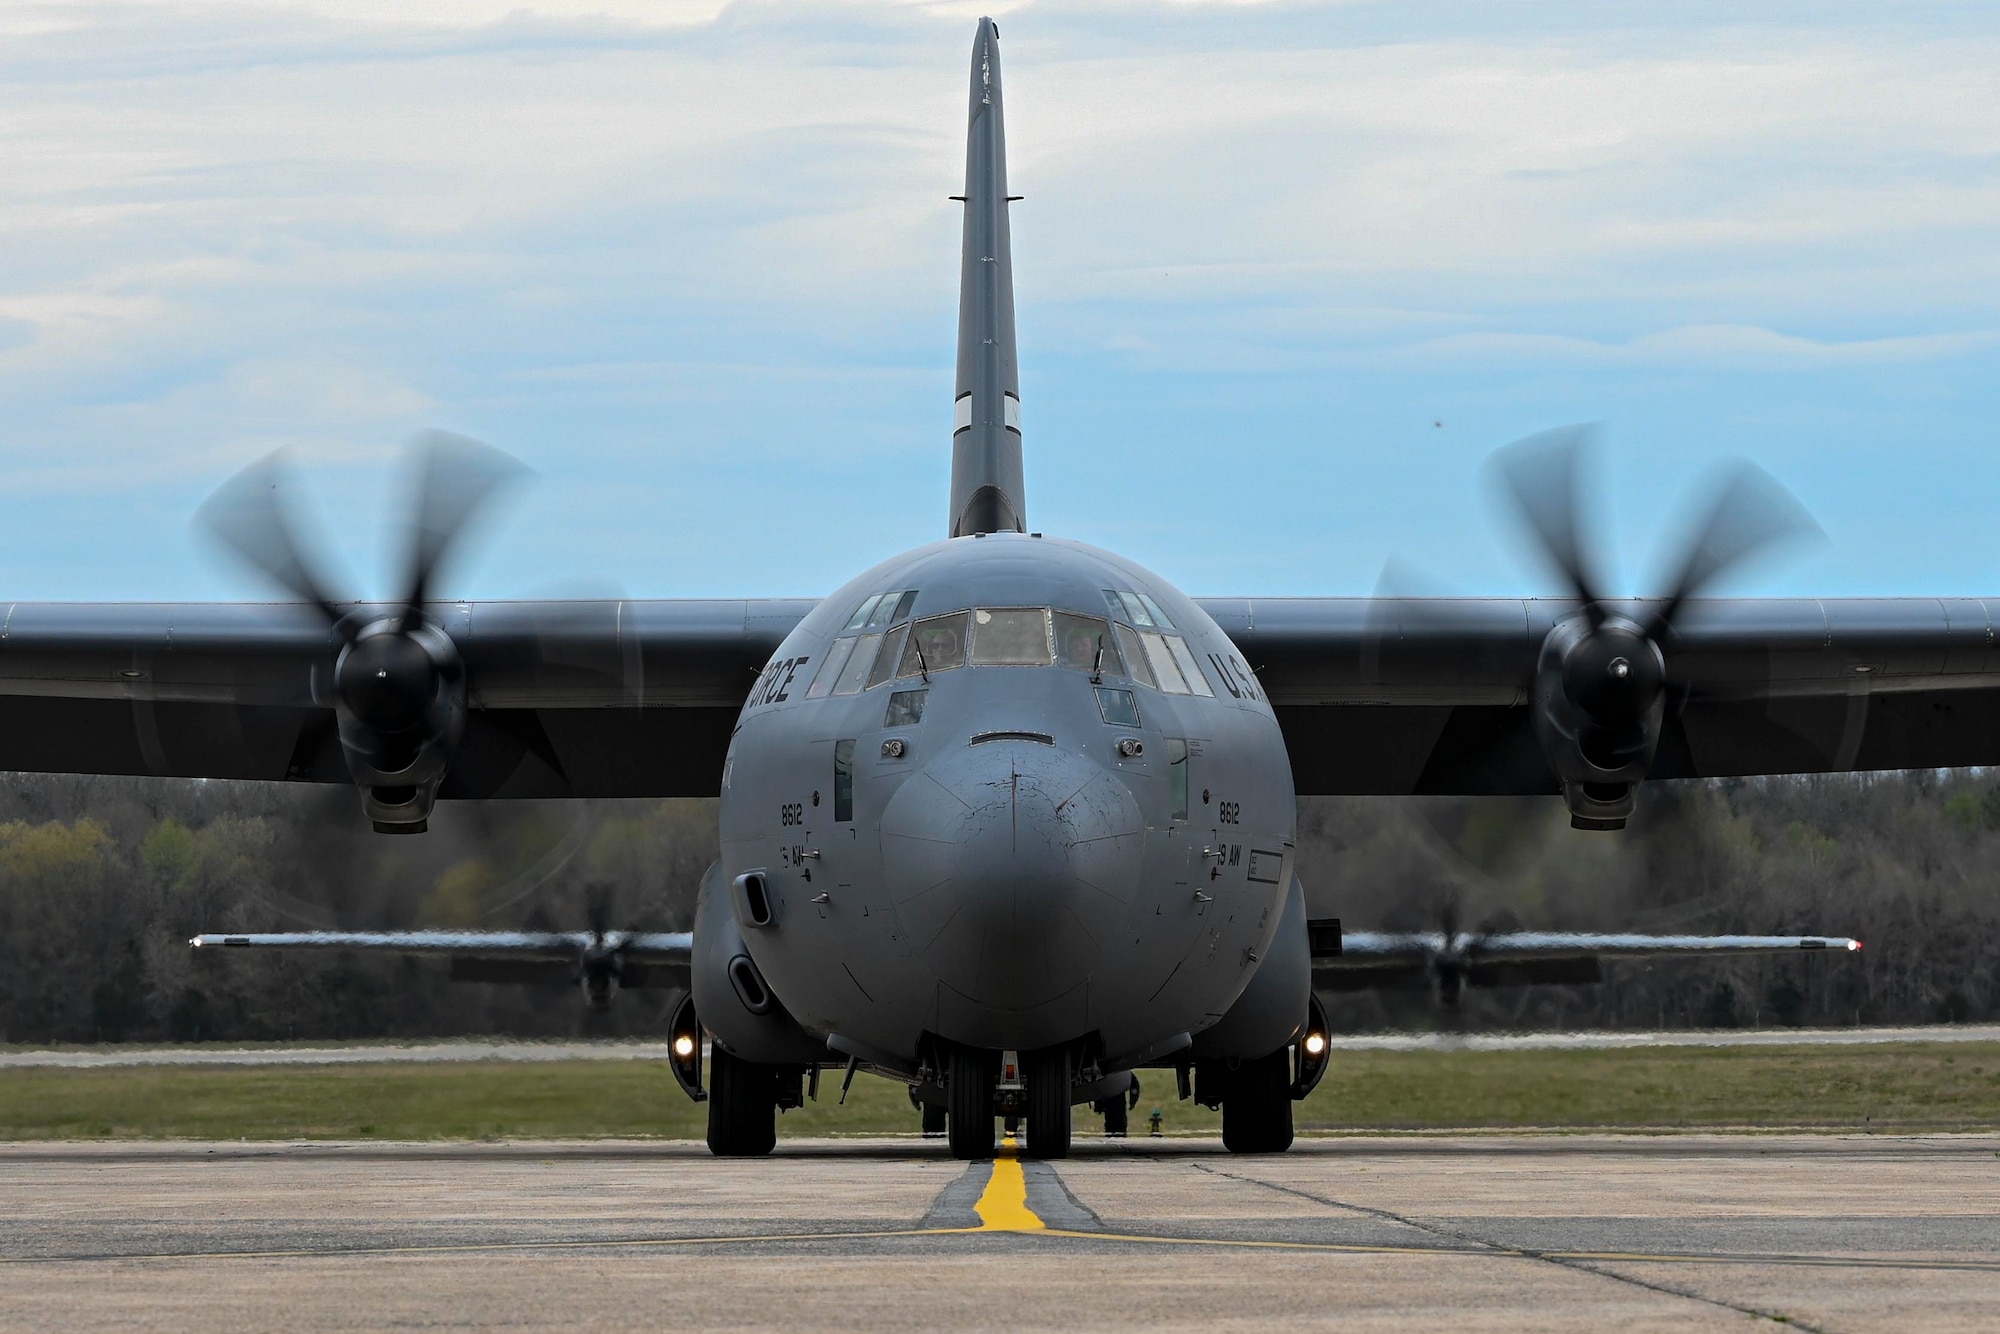 A C-130J Super Hercules taxis on the flightline at Little Rock Air Force Base, Arkansas, as Airmen from the 19th Airlift Wing return from a deployment, April 4, 2022. Airmen from the 19th AW deployed to Ali Al Salem Air Base, Kuwait, which is known as U.S. Central Command’s Theater Gateway, and is capable of responding to contingencies throughout the area of responsibility through tactical airlift operations. (U.S. Air Force photo by Airman 1st Class Maria Umanzor Guzman)